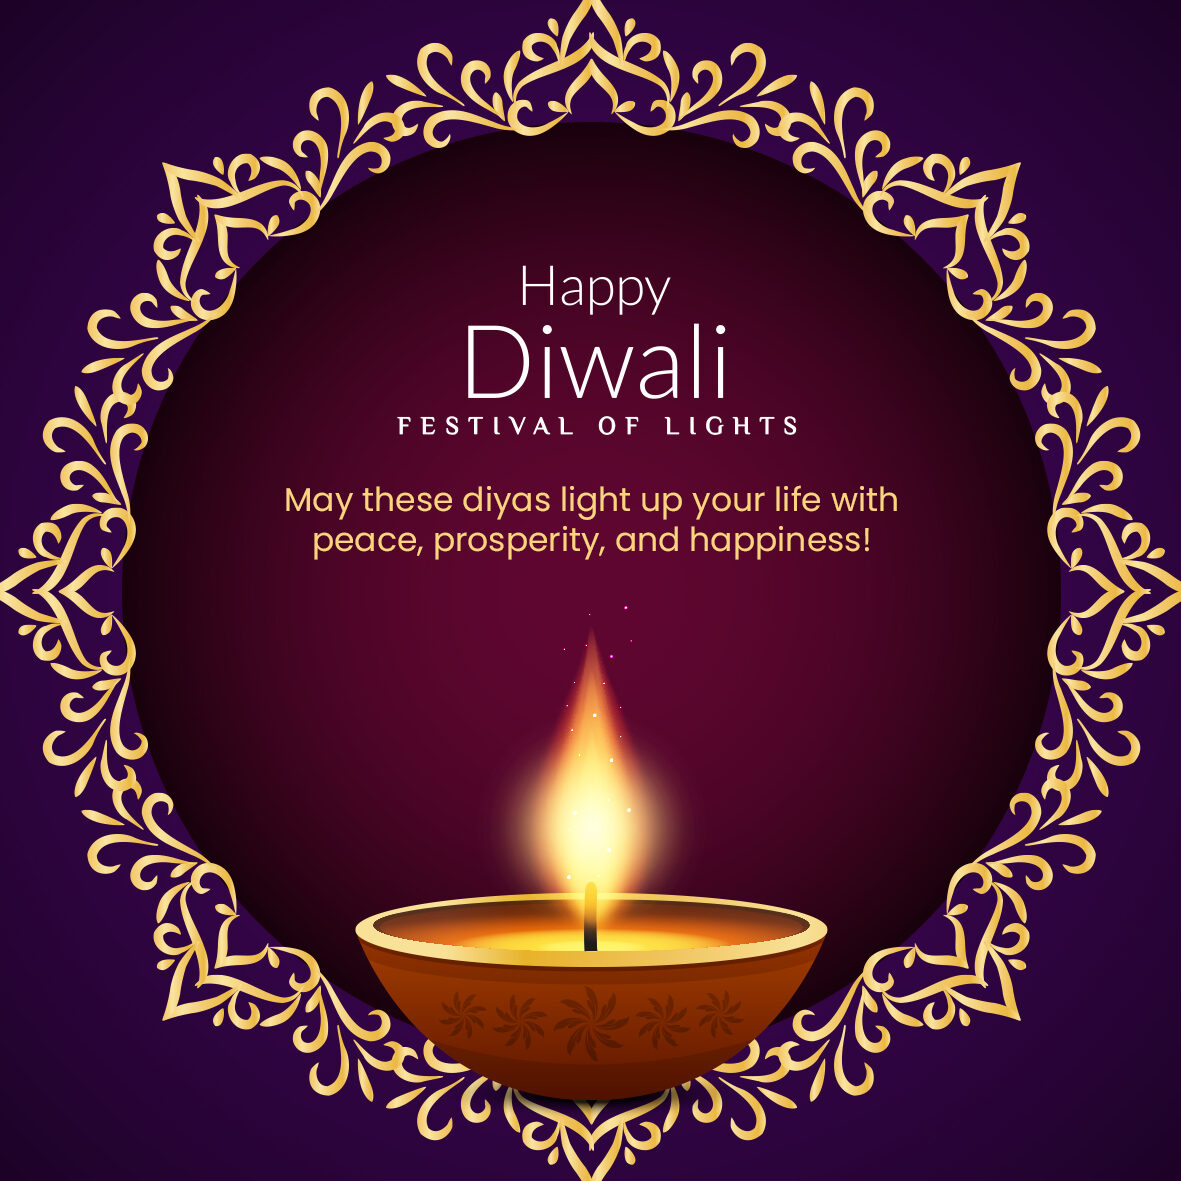 diwali messages and wishes 